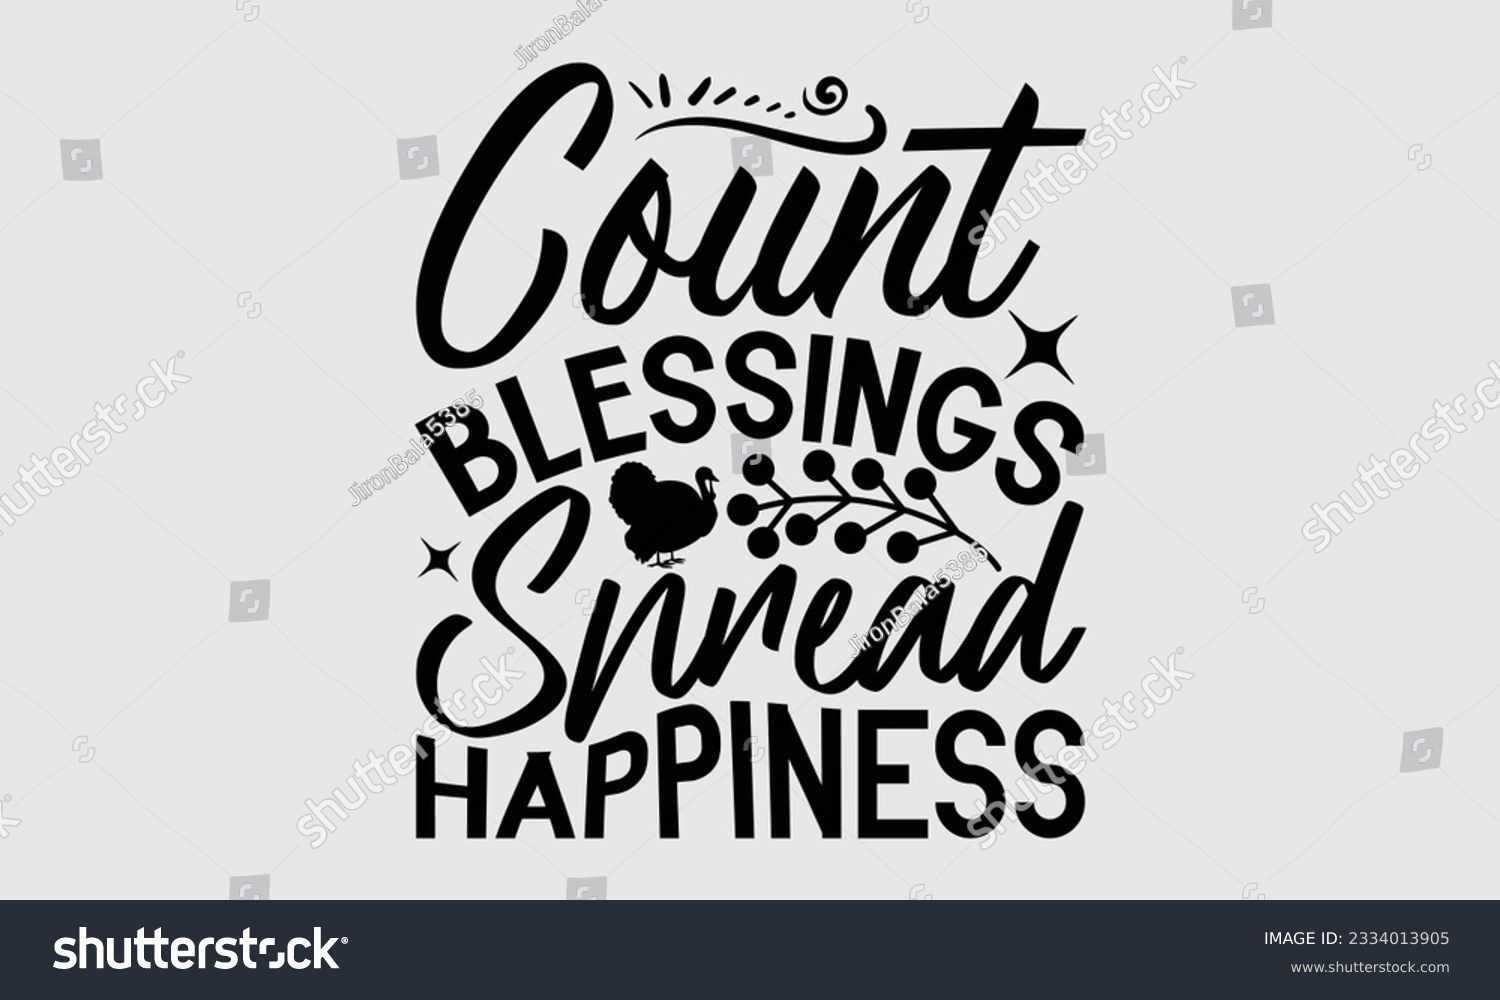 SVG of Count Blessings Spread Happiness - Thanksgiving svg typography t-shirt design, this illustration can be used as a print on Stickers, Templates, and bags, stationary or as a poster.
 svg